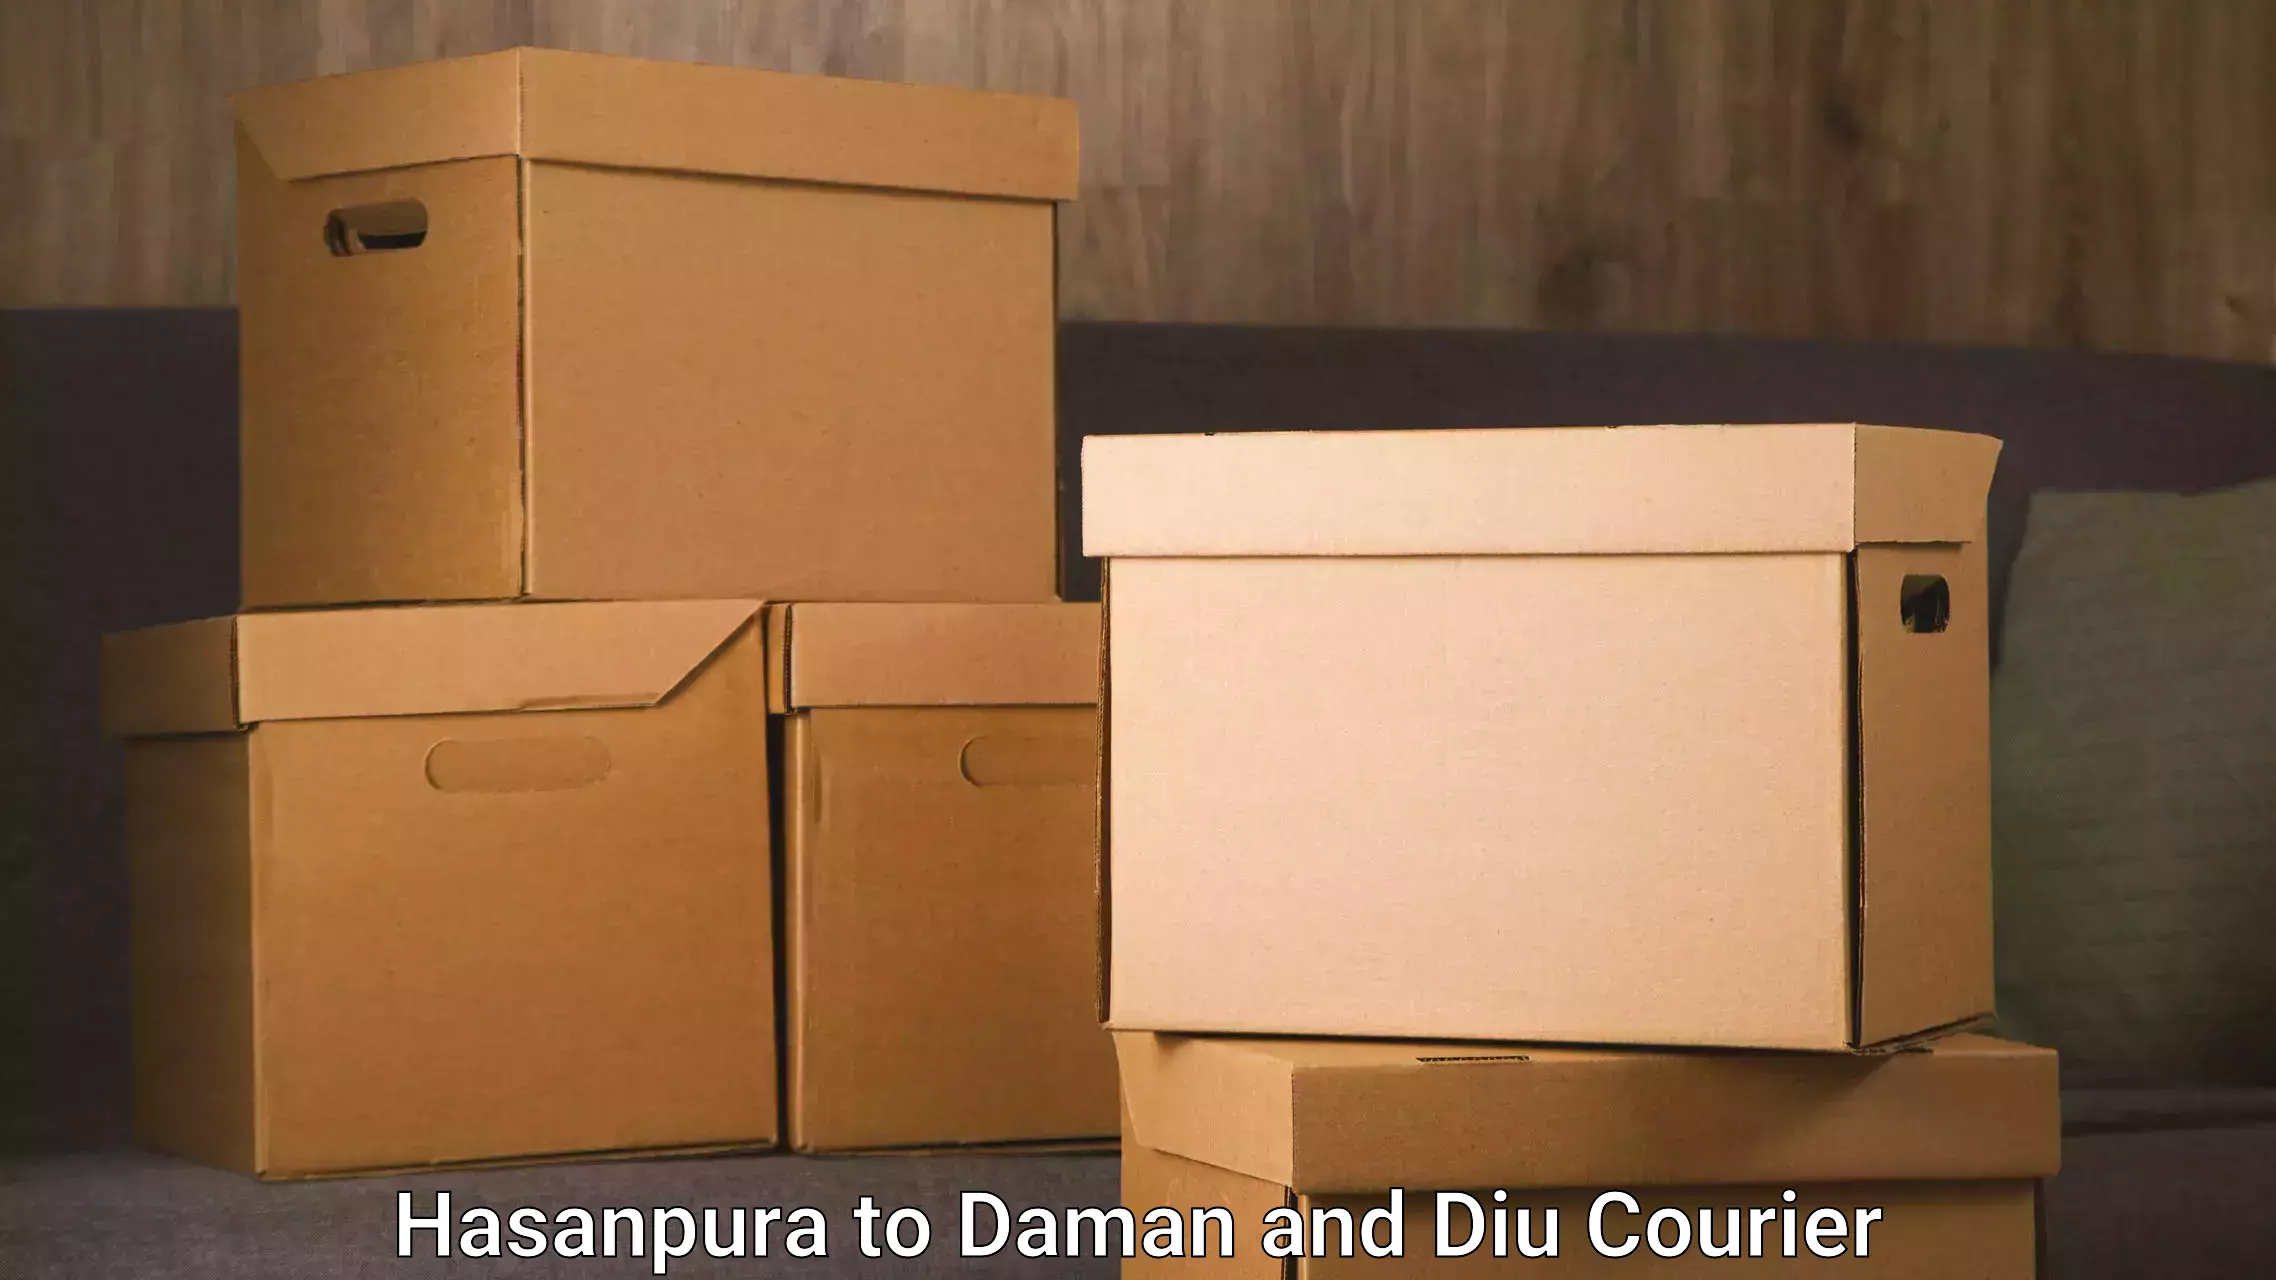 Moving and handling services Hasanpura to Daman and Diu